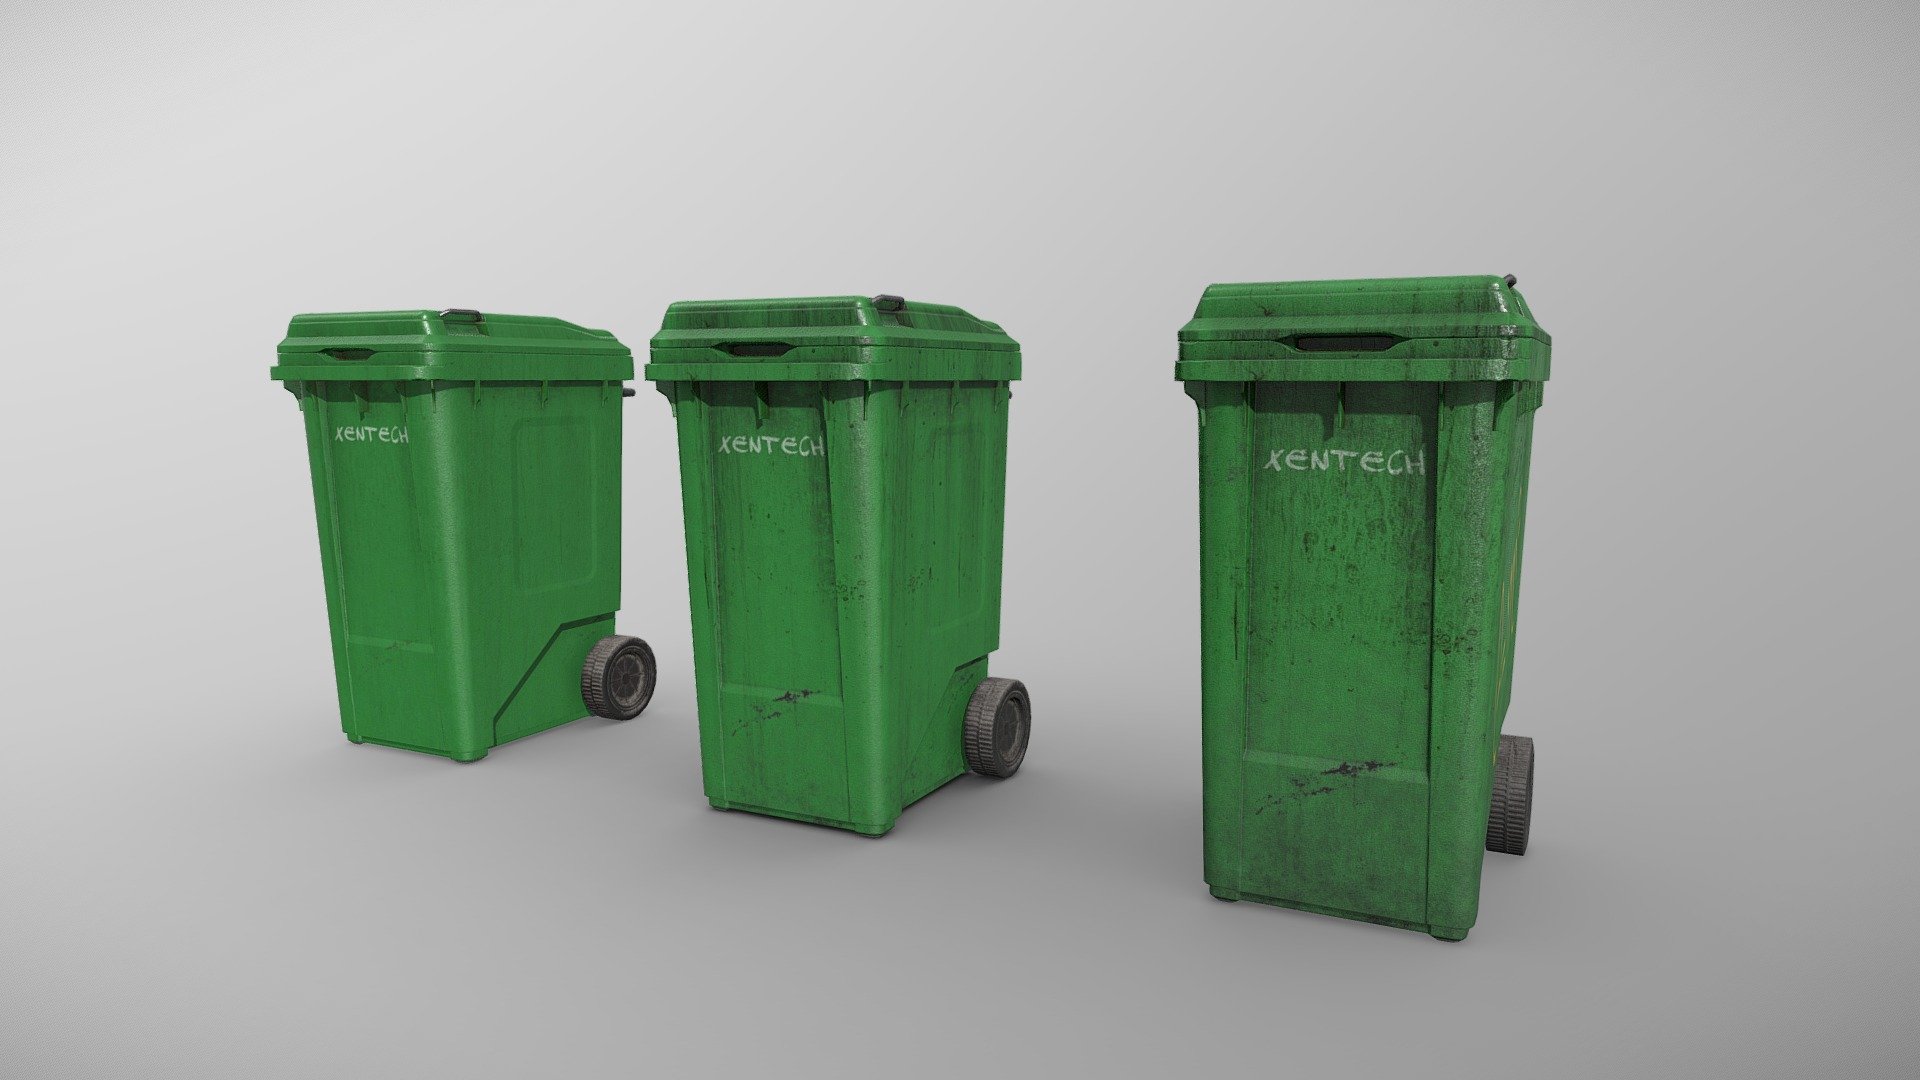 High quality, game-ready 3D models of trash bins, with 3 variations : clean, slightly dirty, and dirty.
The internals are modeled as well, and the objects are separated for easy animation and rigging 3d model